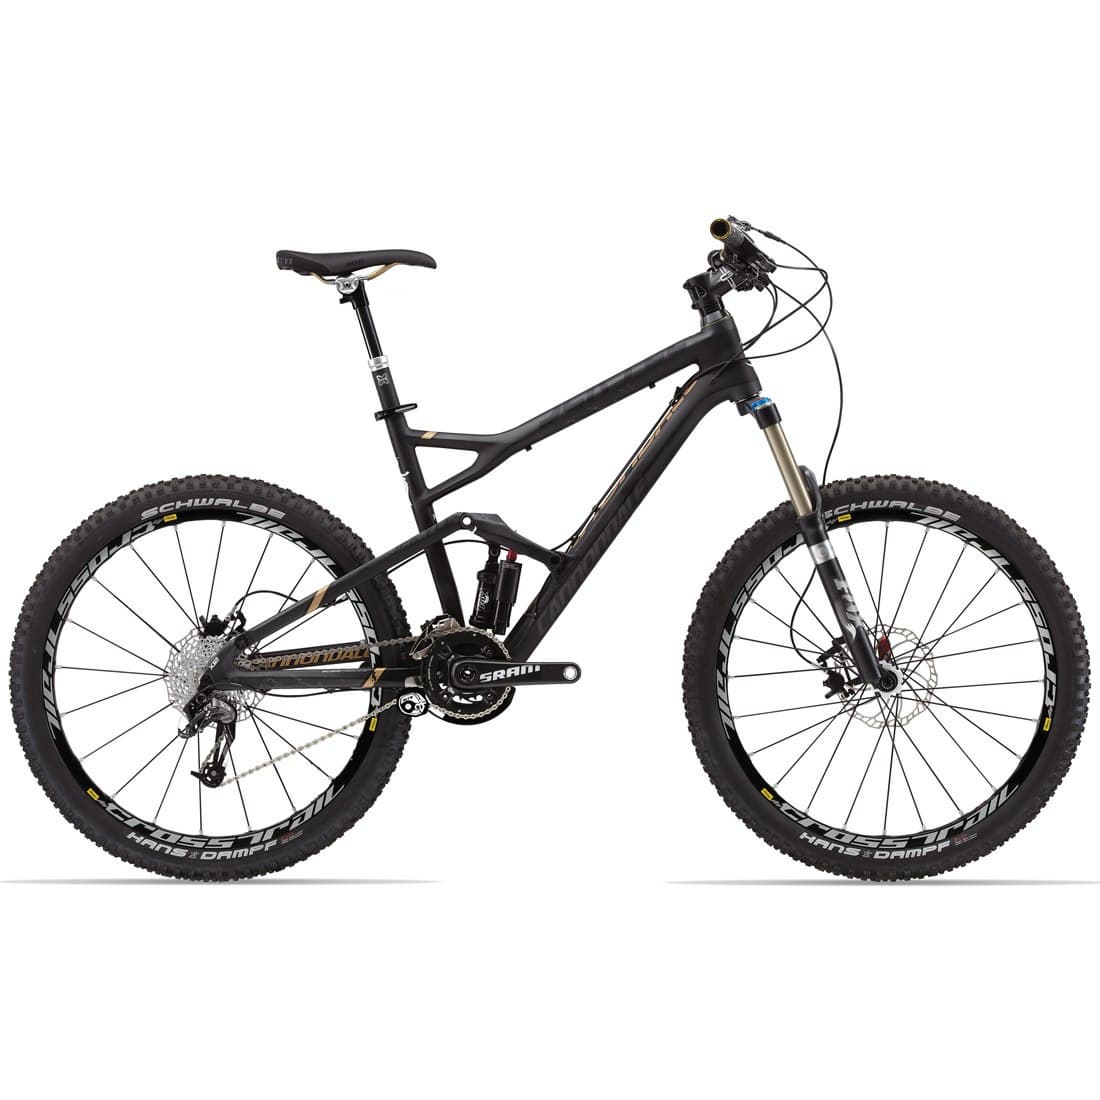 Cannondale JEKYLL CARBON 2 Mountain Bike 2014